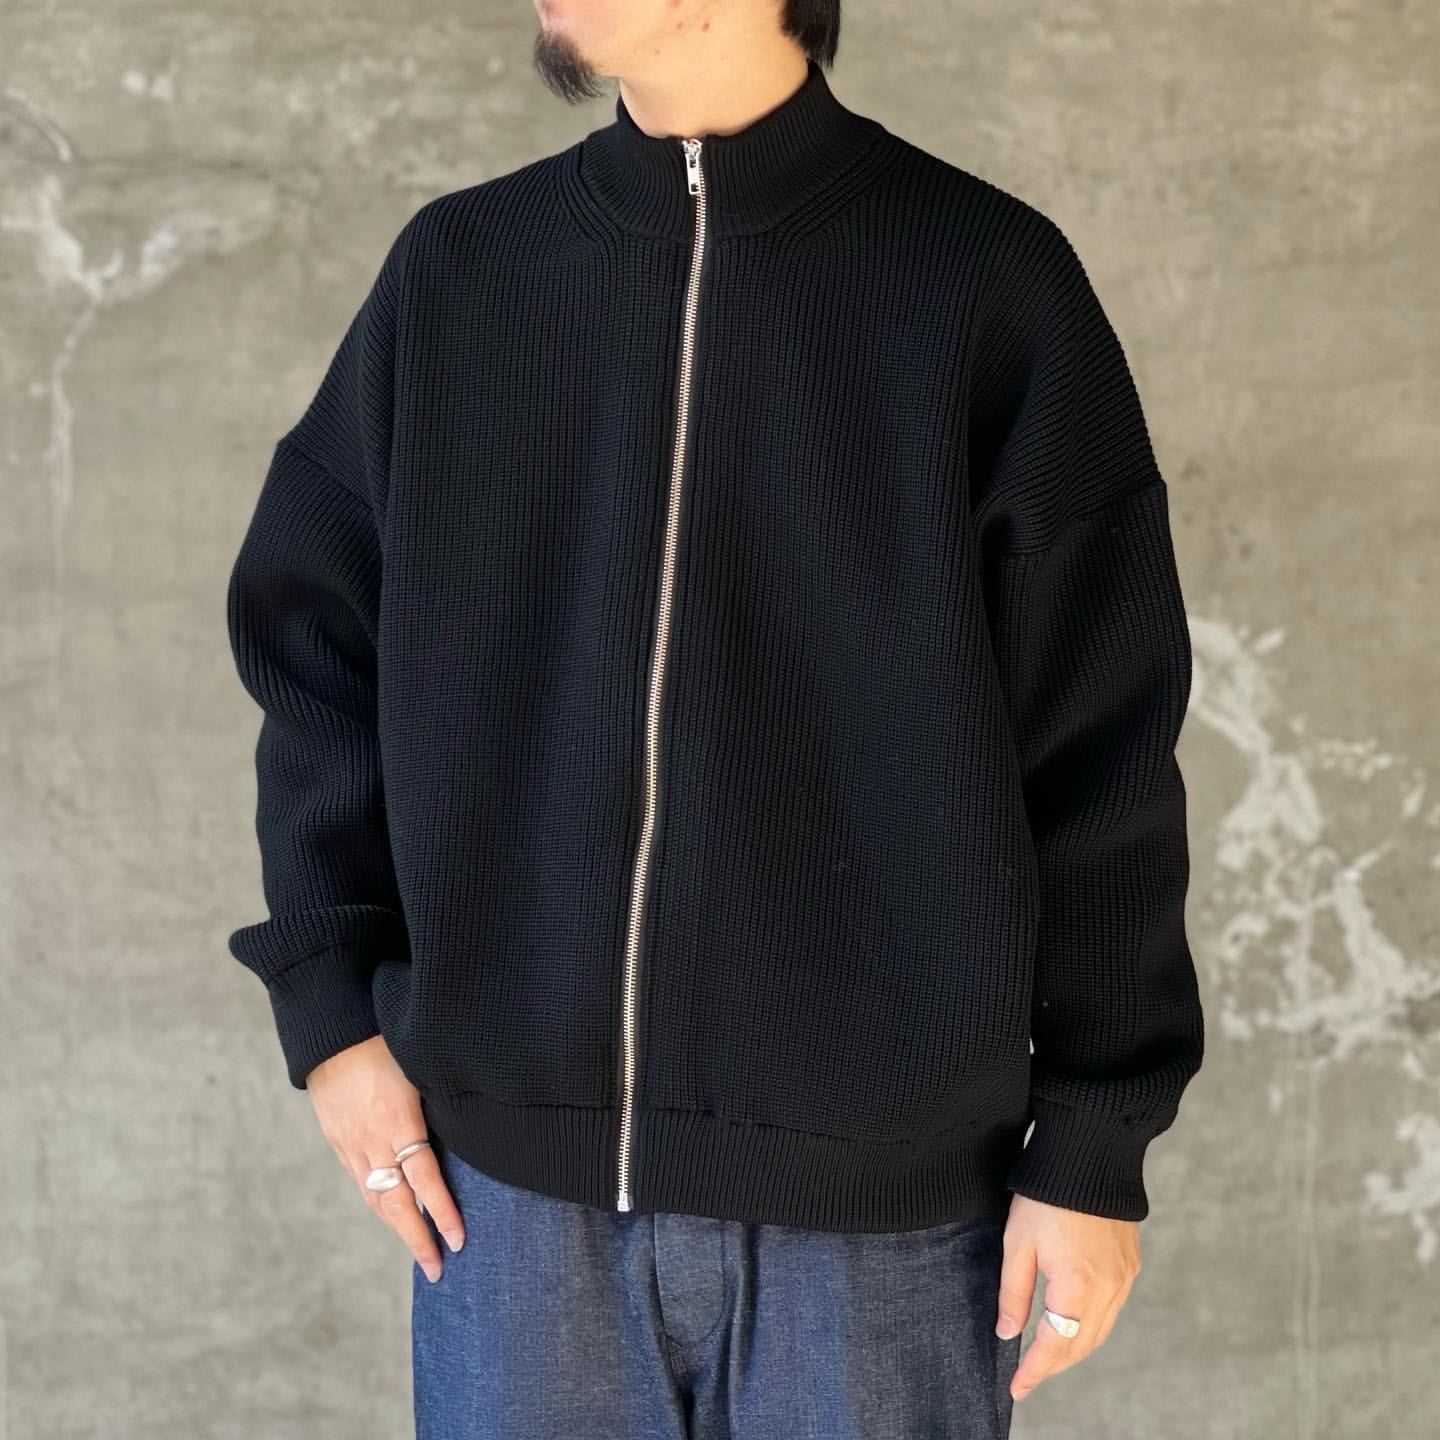 COOTIE PRODUCTIONS® / Rib Stitch Drivers Sweater